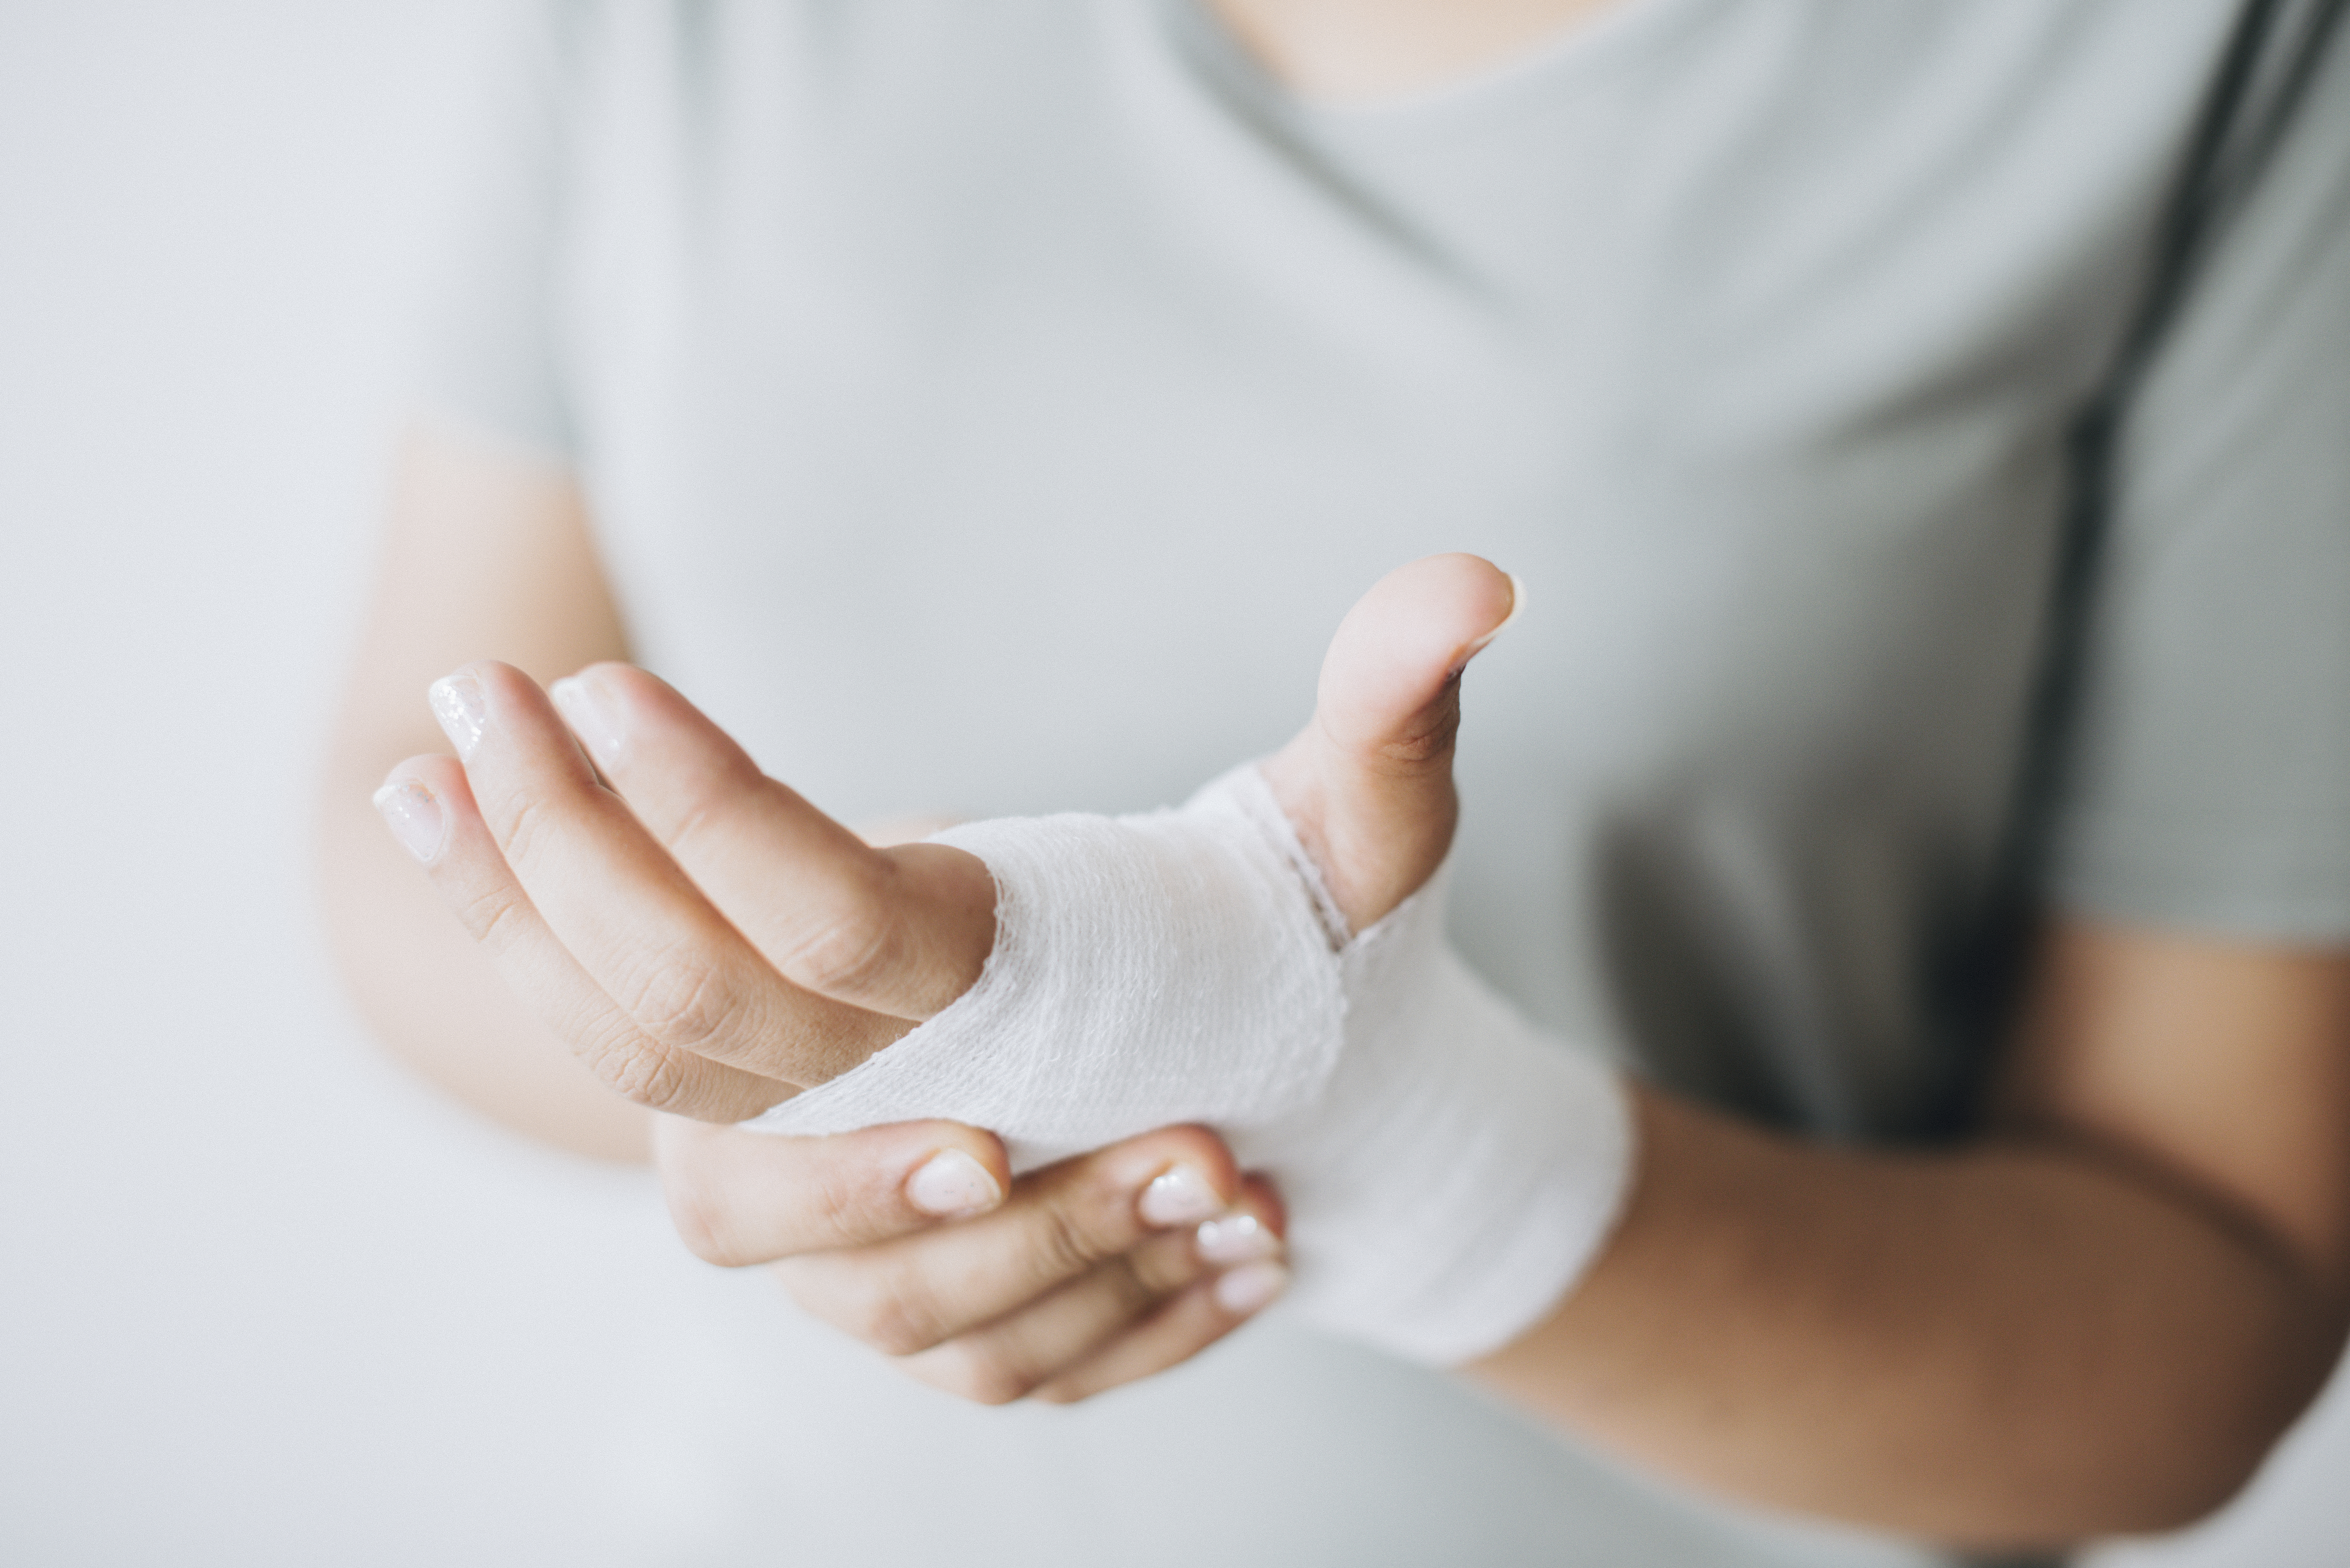 woman-with-gauze-bandage-wrapped-around-her-hand